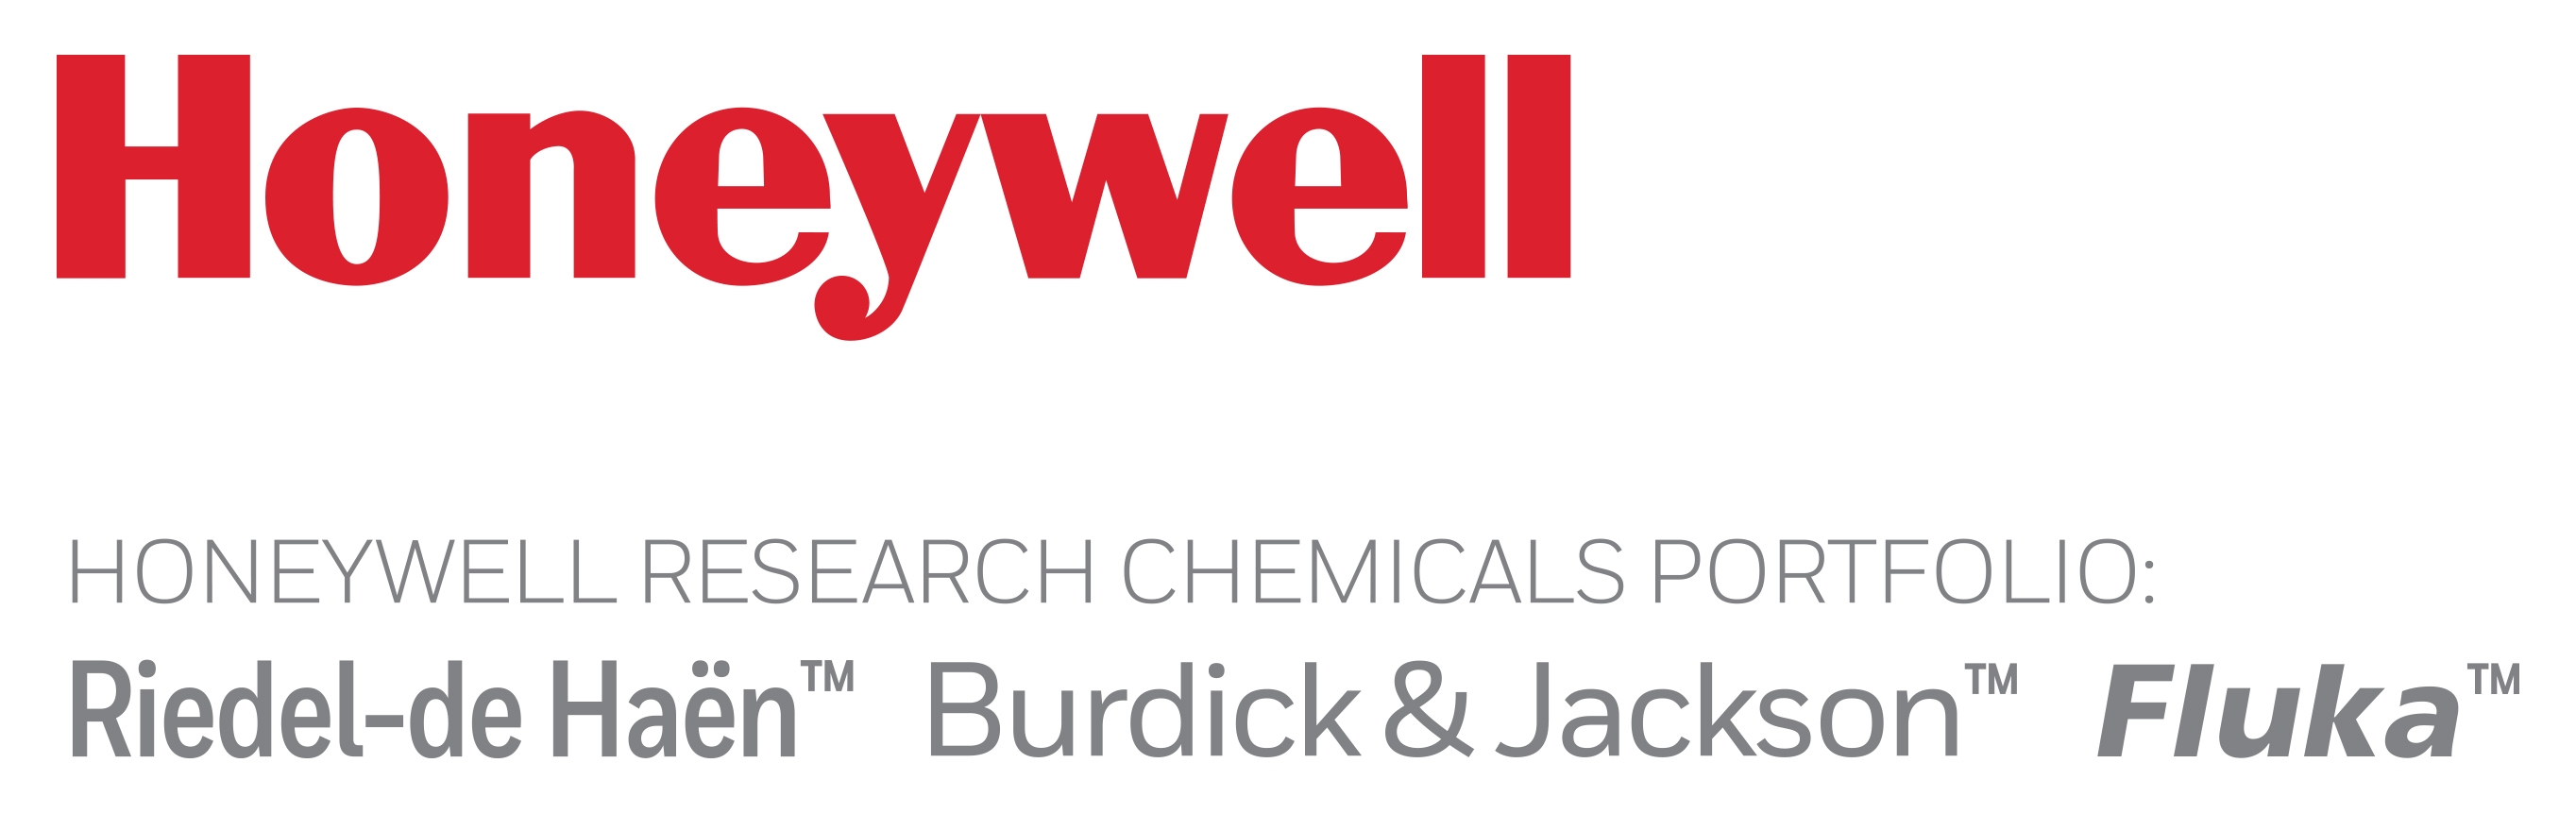 honeywell-research-chemicals-sponsored-by-chemistry-world